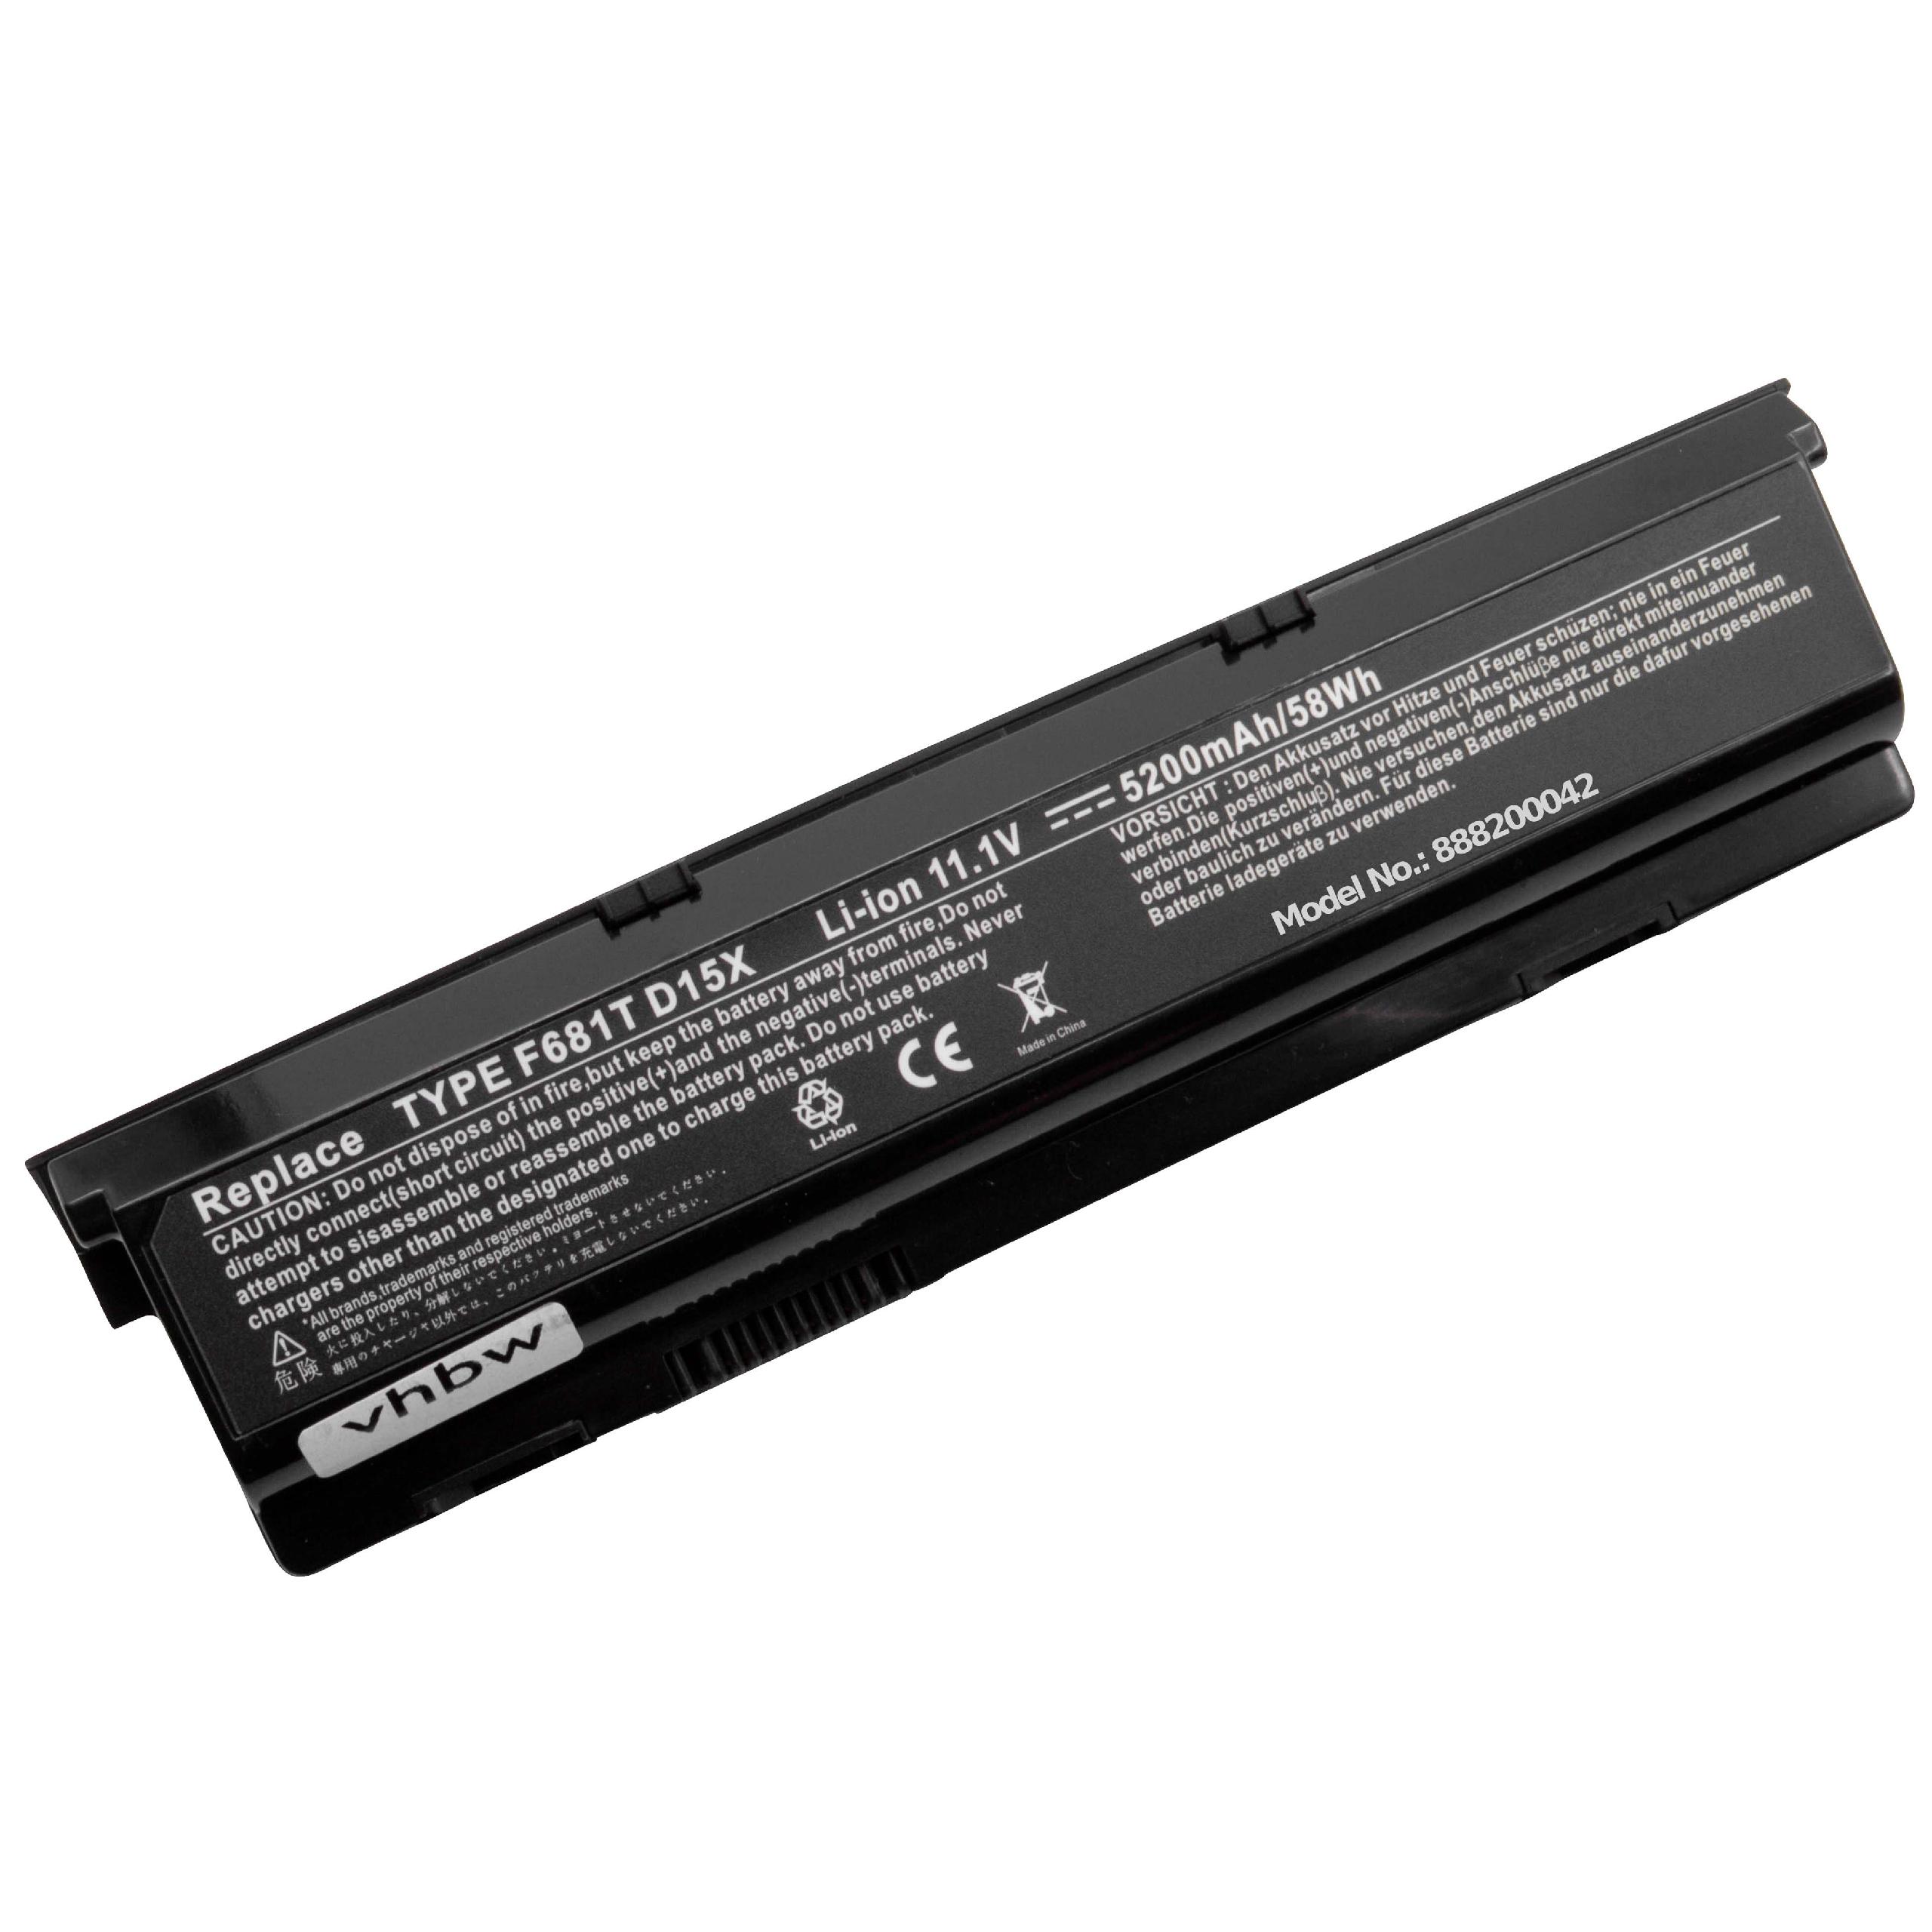 Notebook Battery Replacement for Dell 0HC26Y, 0F681T, 0D951T, 312-0207, 0W3VX3 - 5200mAh 11.1V Li-Ion, black